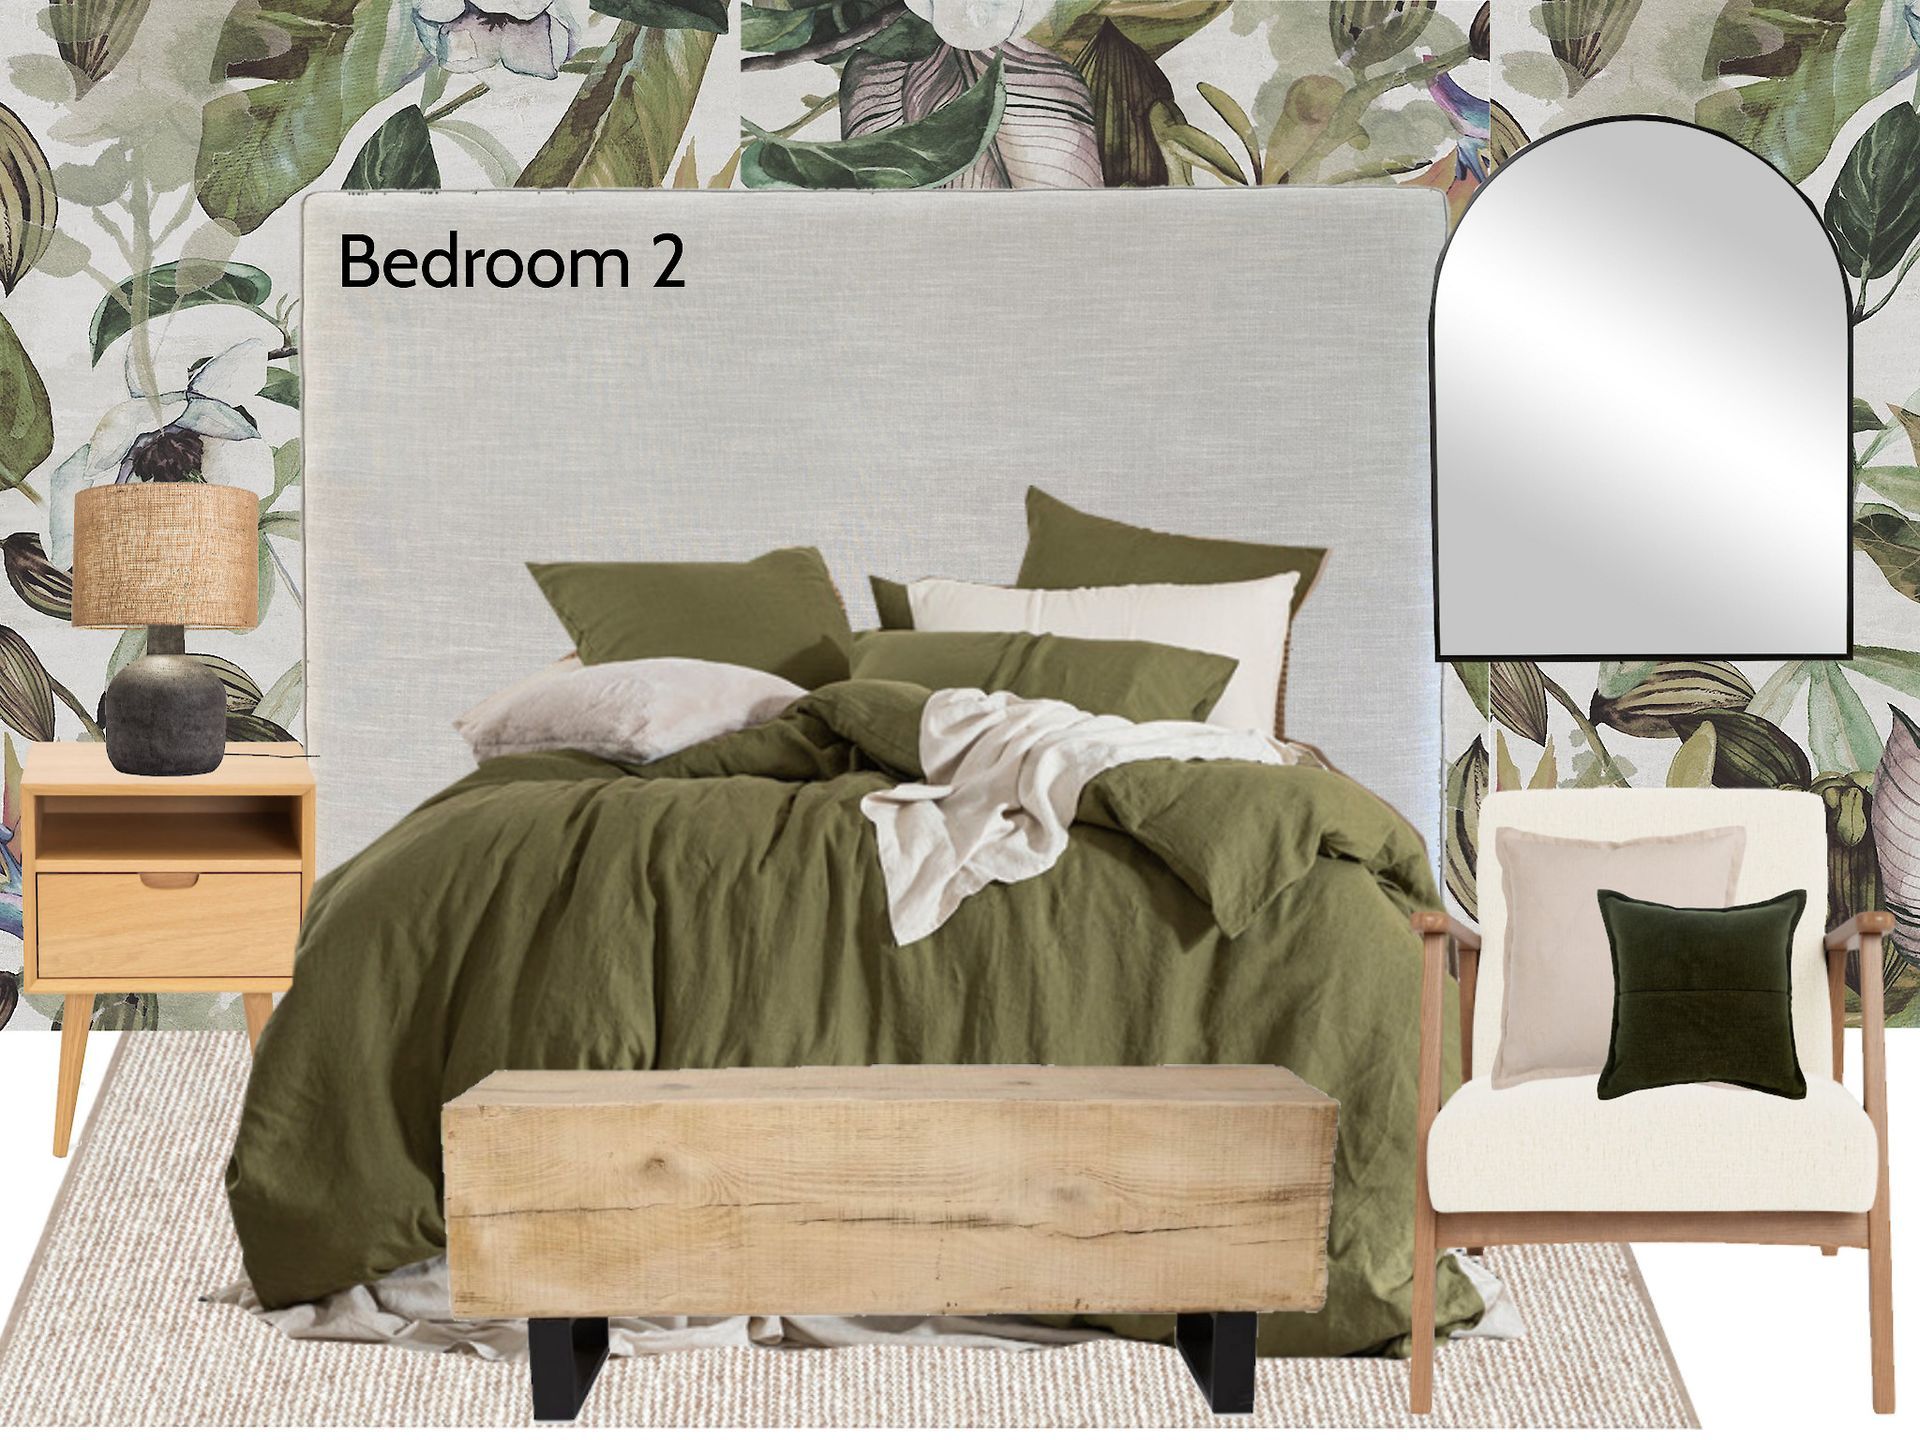 A bedroom with a bed , chair , nightstand and mirror